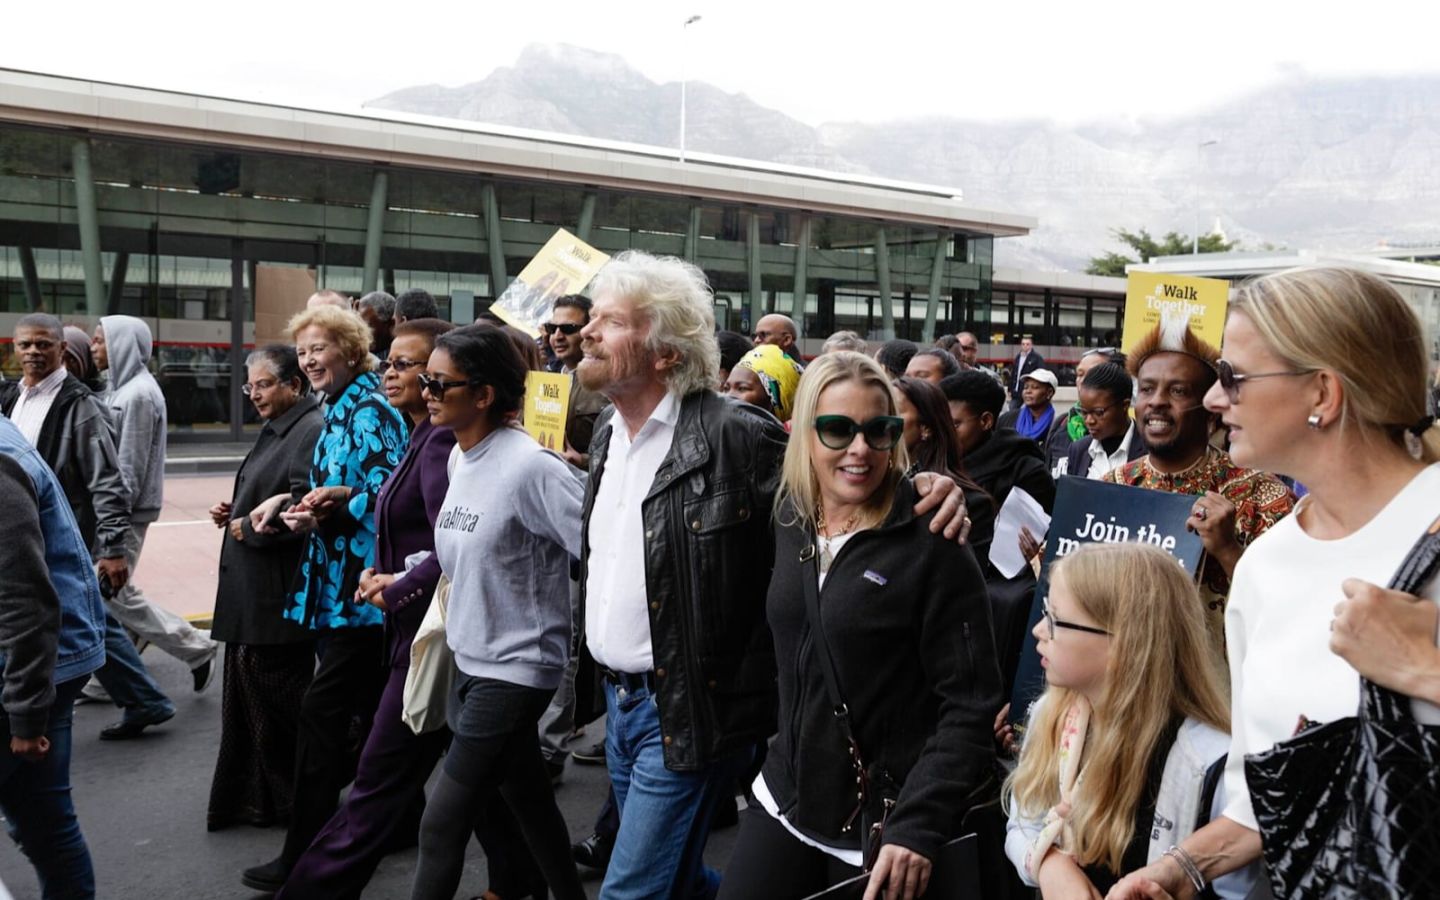 Richard Branson walks with a large group  of people.  He is wearing jeans, a black leather jacket and a white shirt